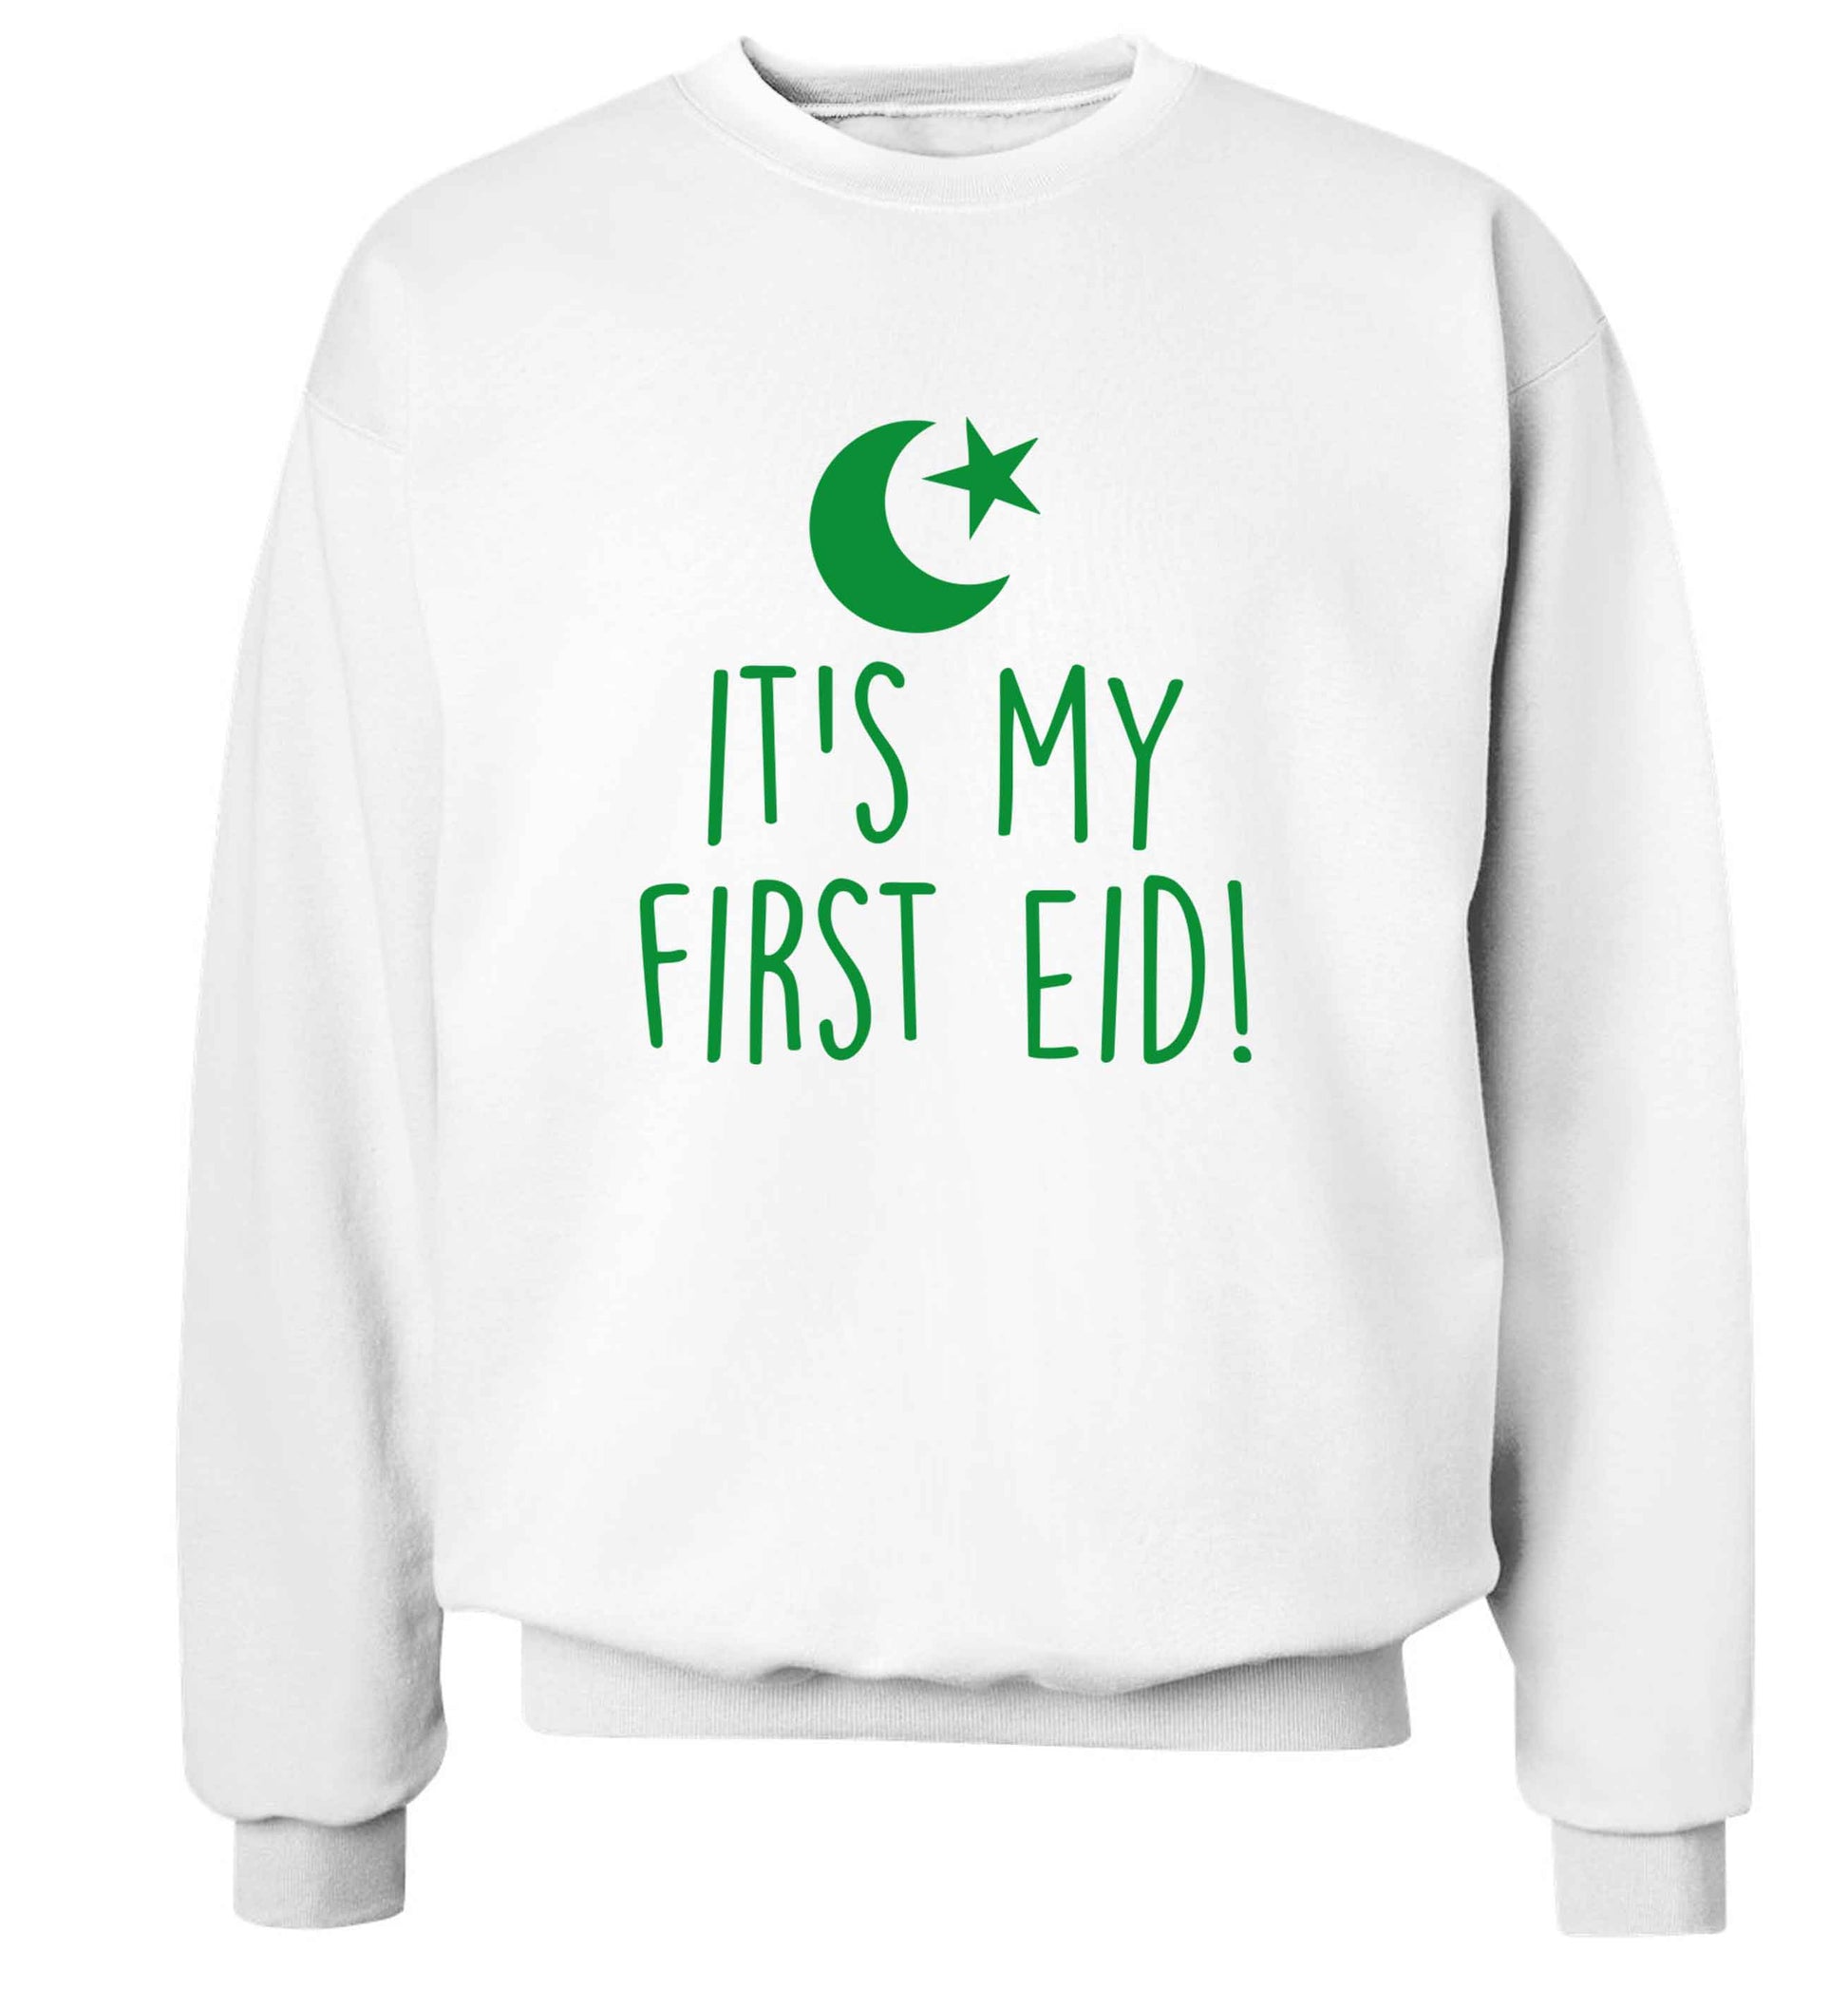 It's my first Eid adult's unisex white sweater 2XL